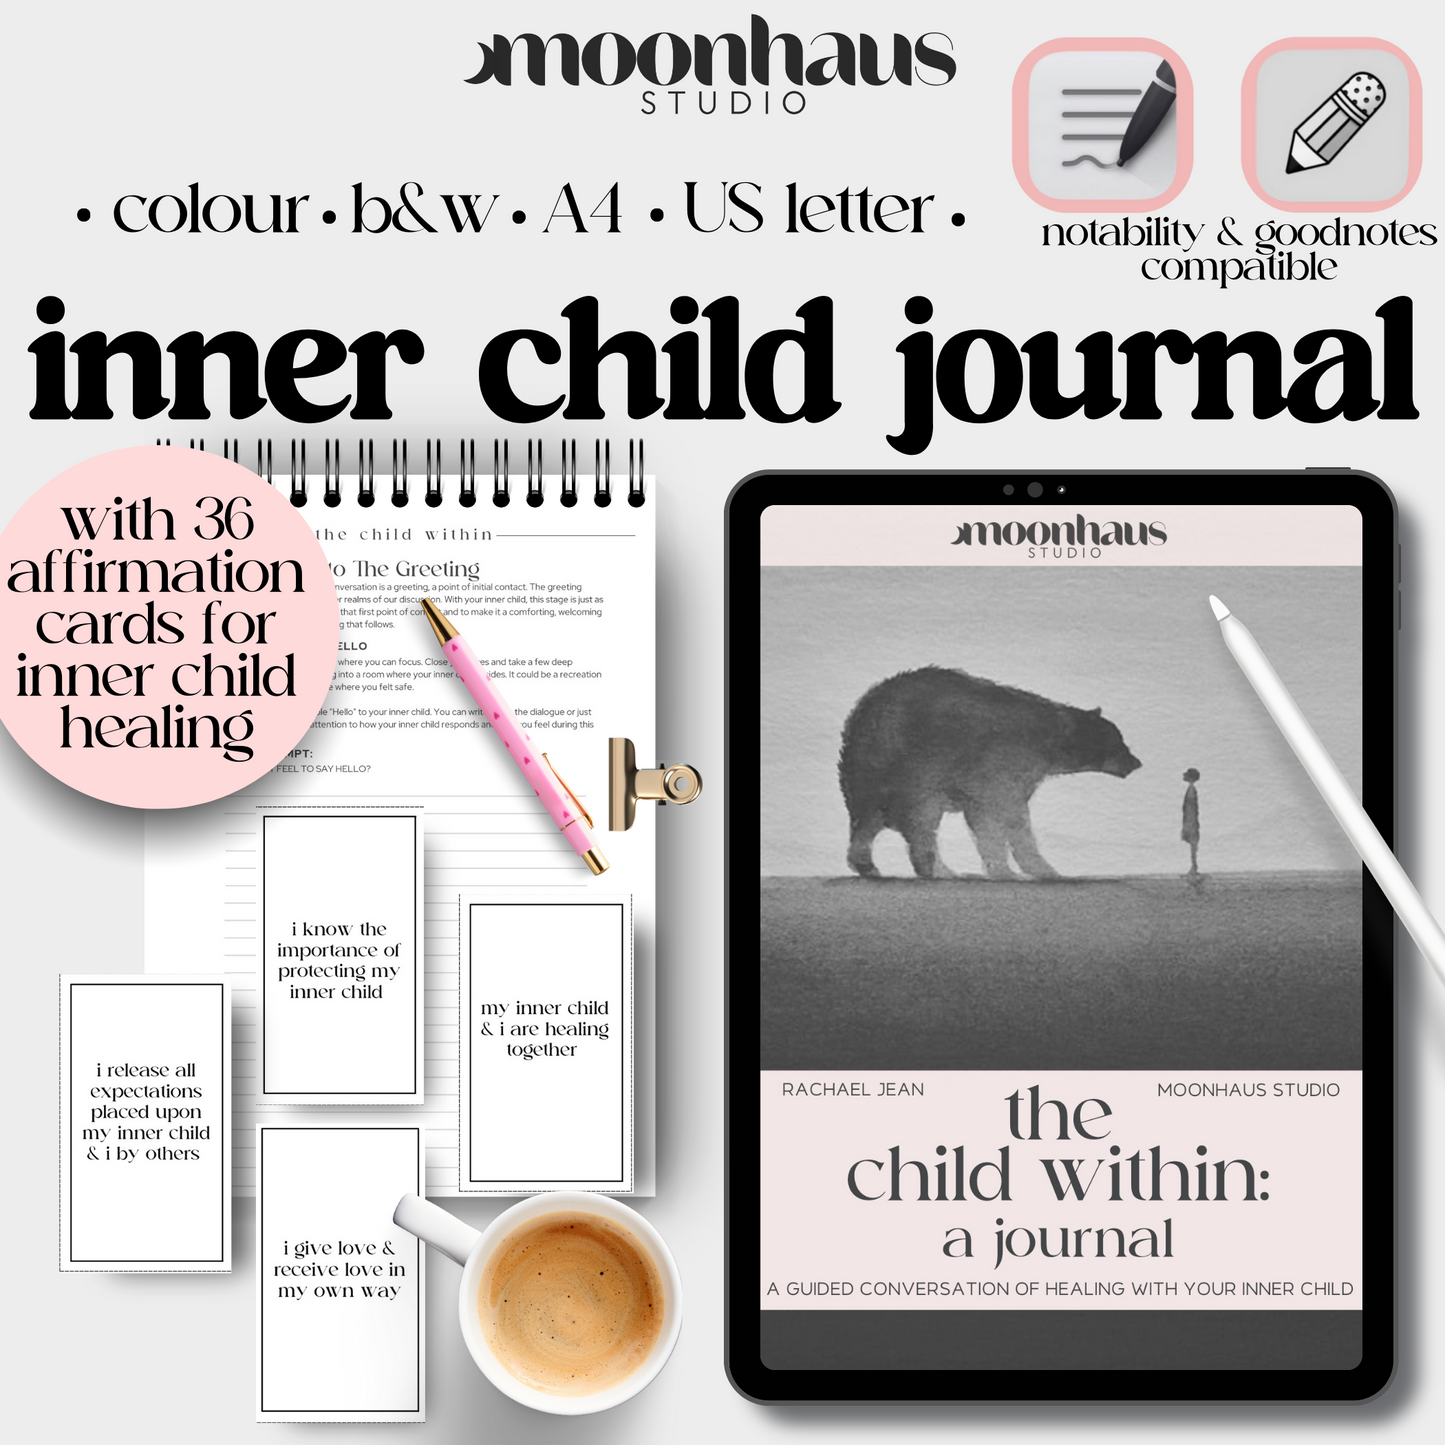 inner child journal: trauma healing, shadow work, guided workbook with digital affirmation cards, therapy tools